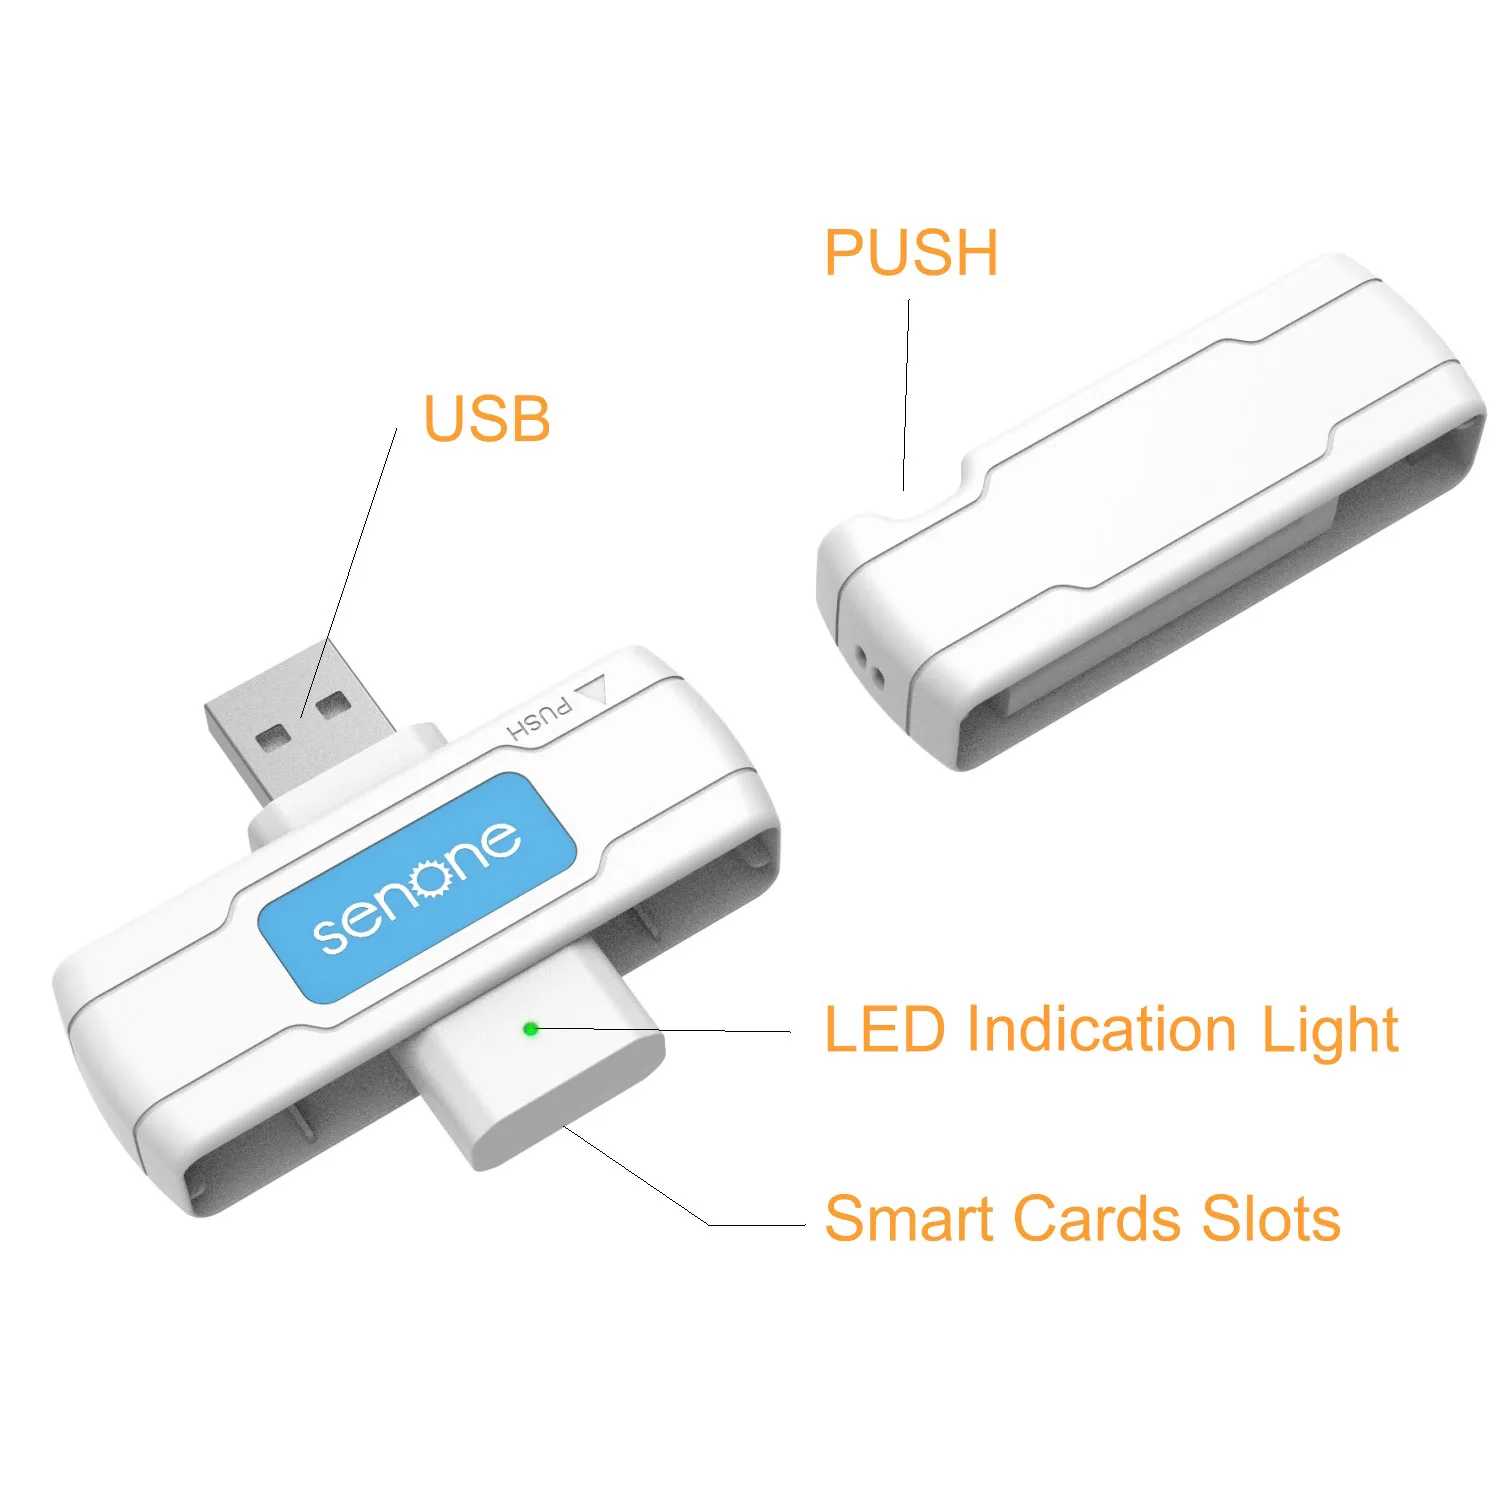 New launched products atm credit usb smart folding id card skimmer reader